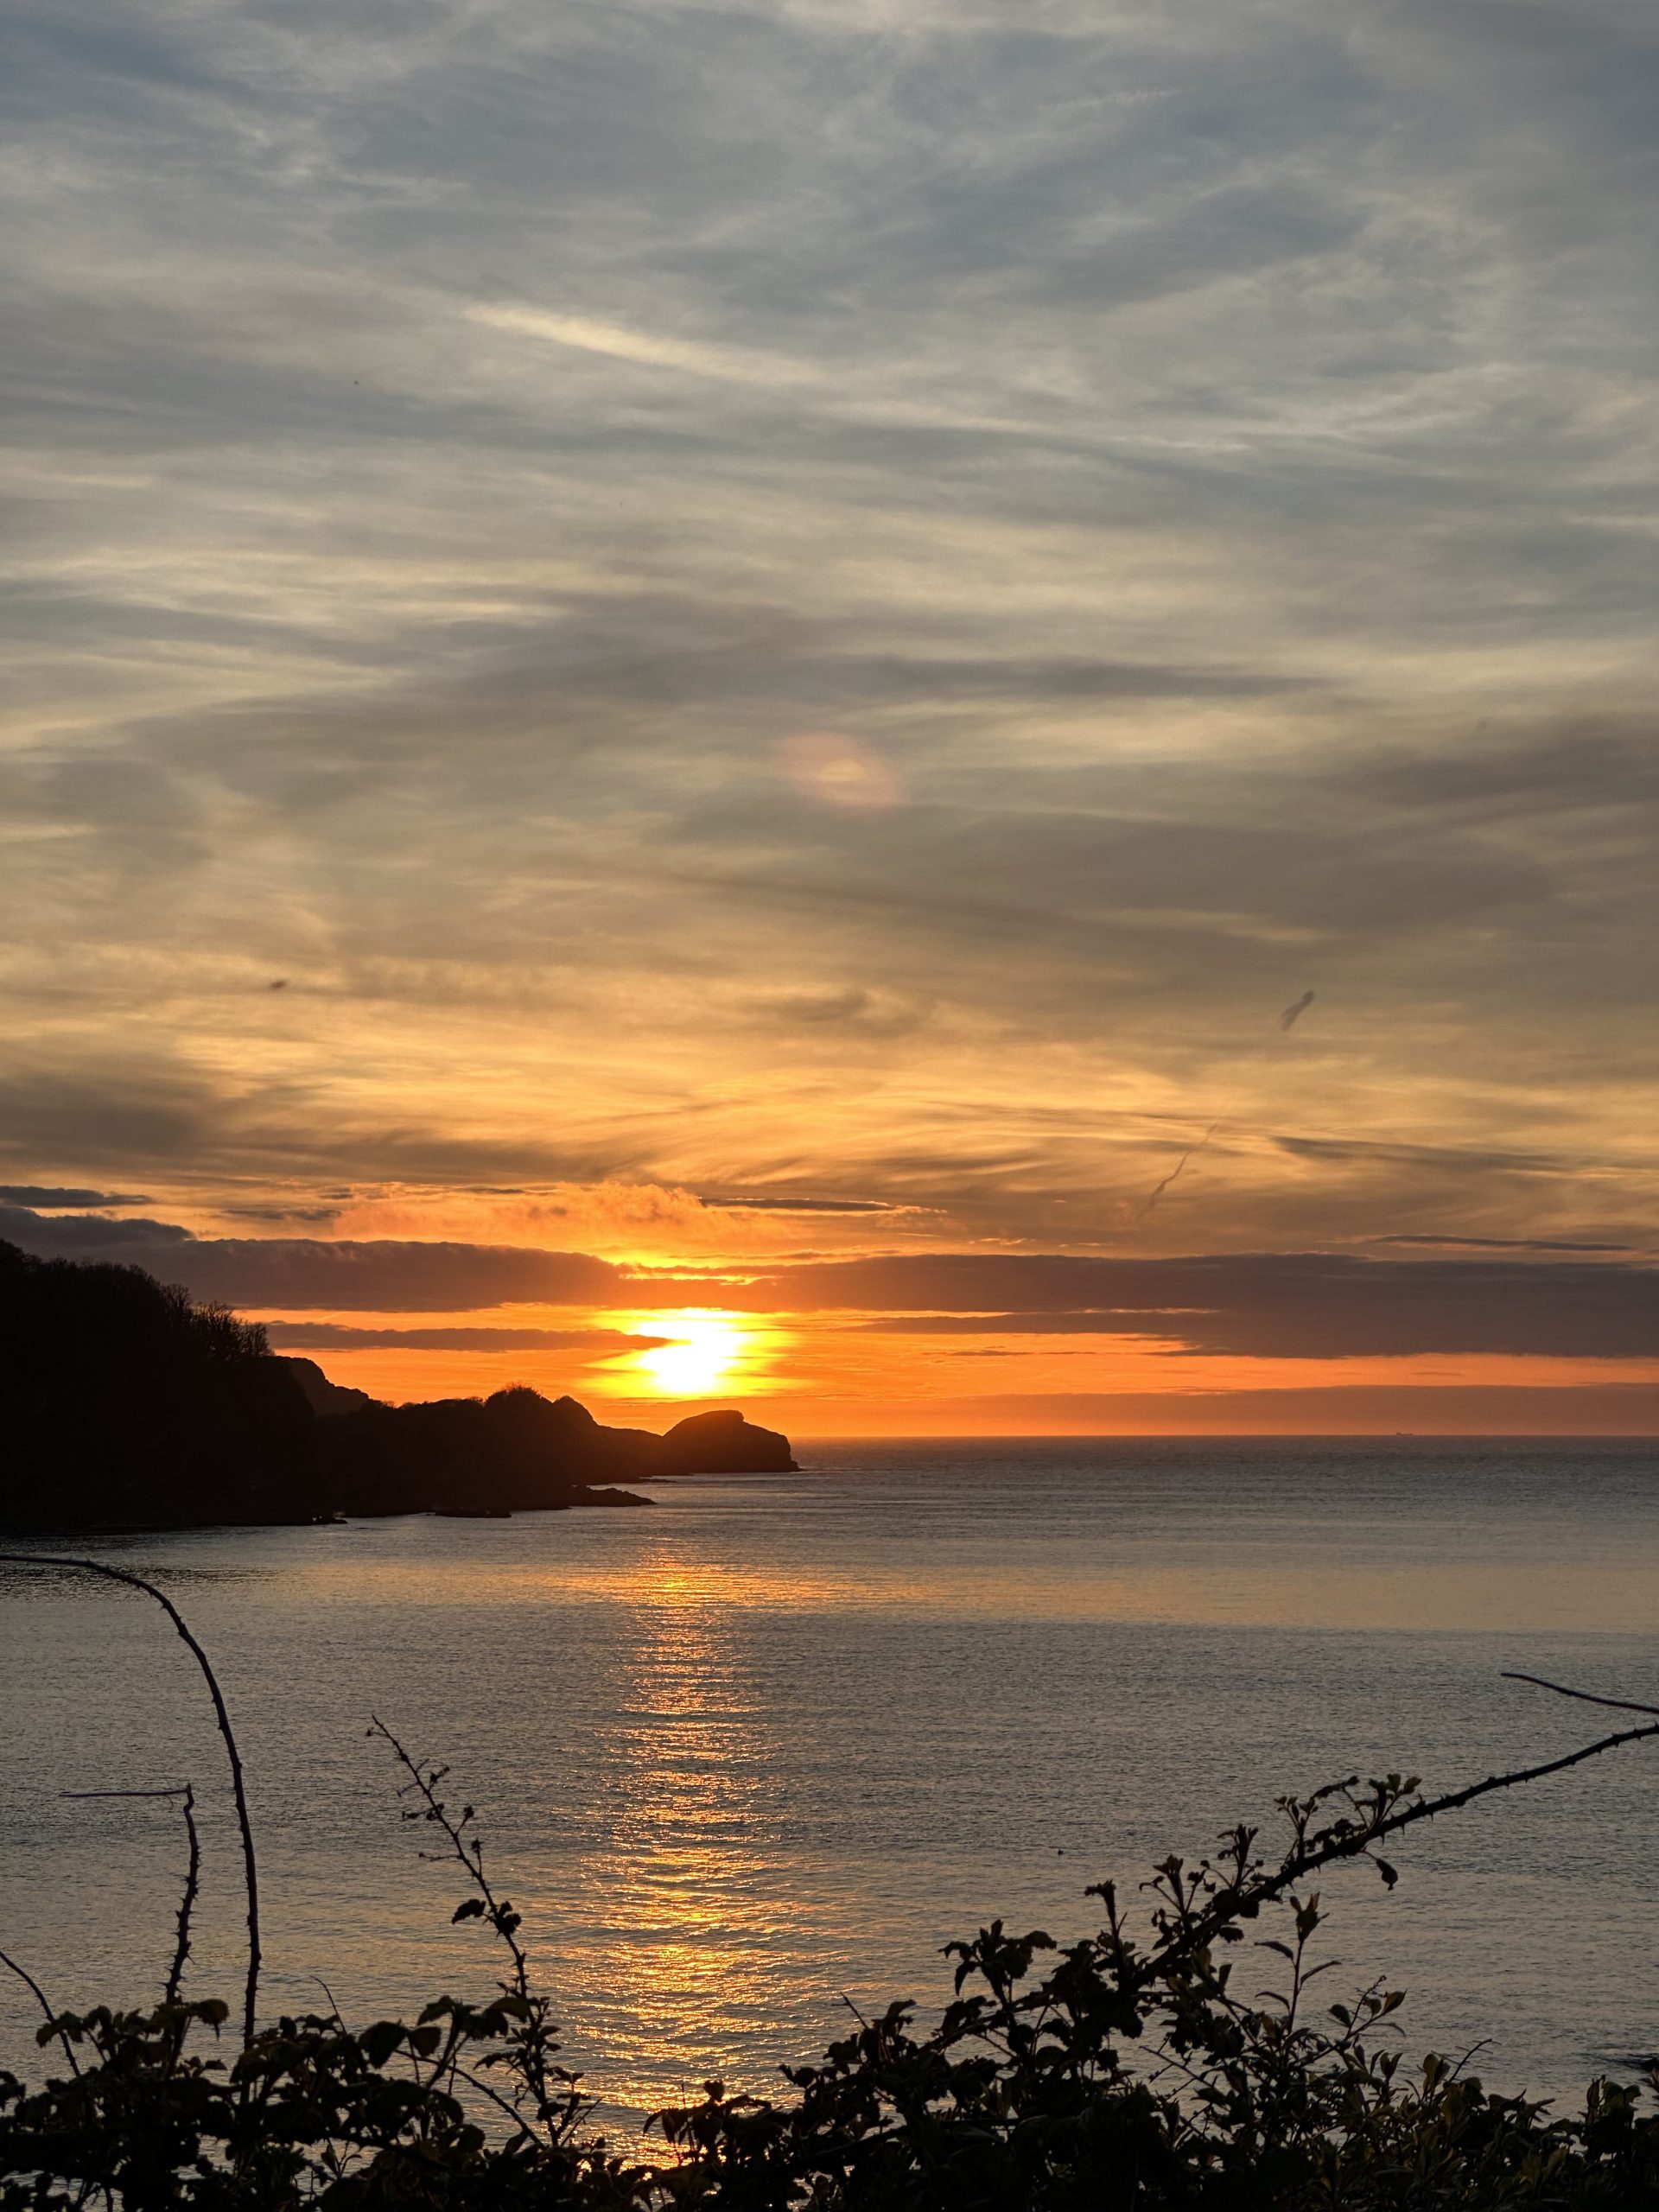 A glowing orange sunset over a silvery blue sea along the Exmoor coast line